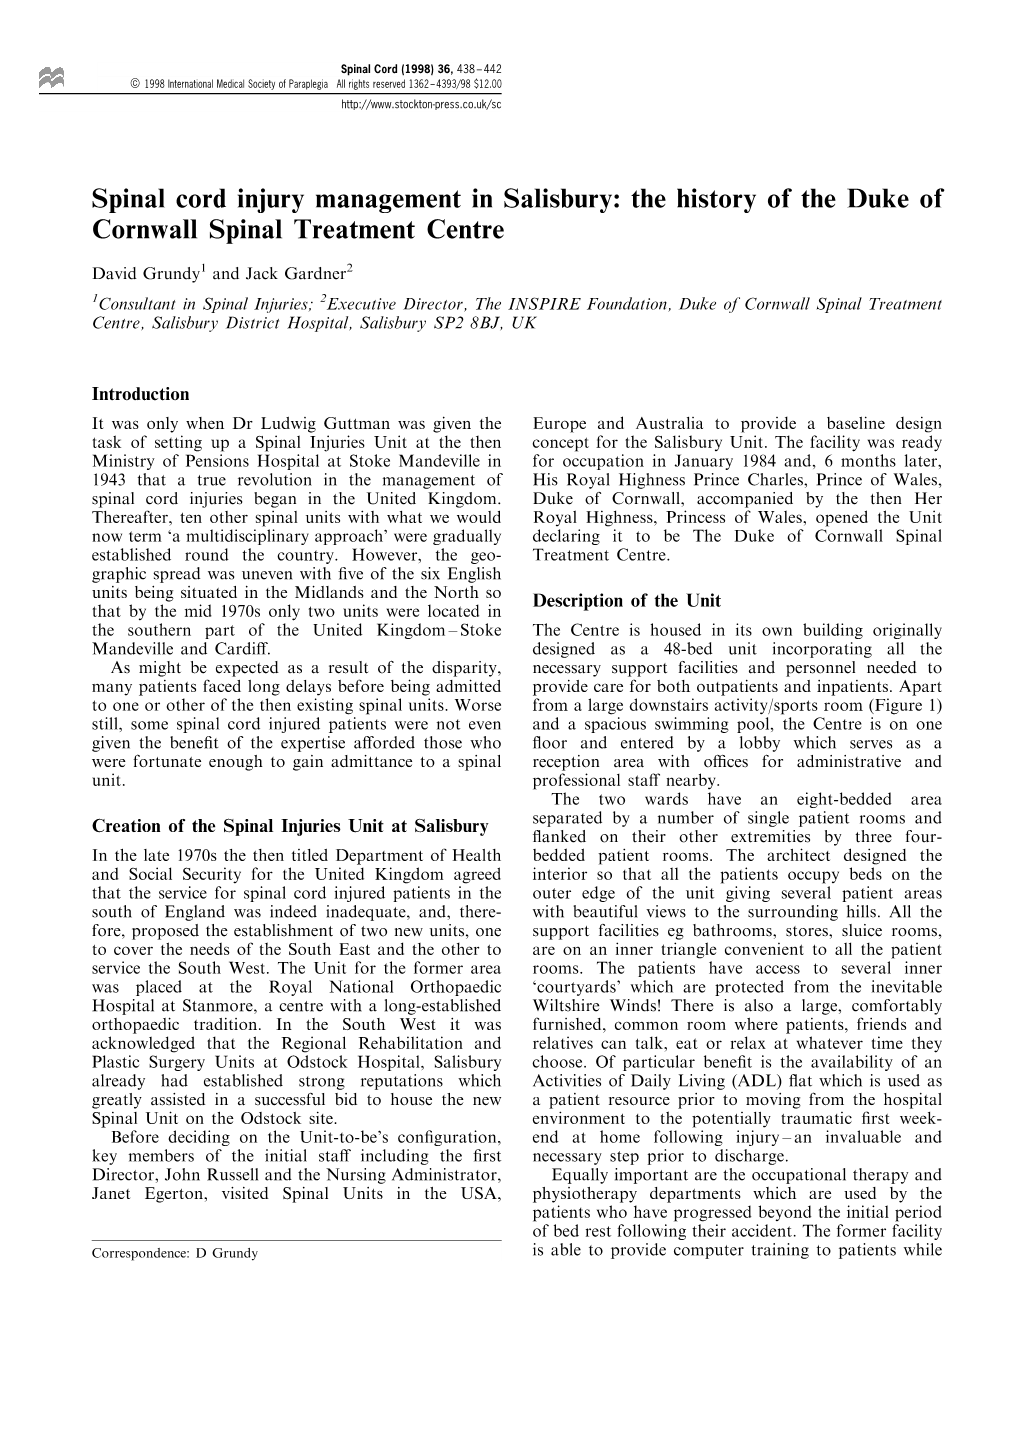 Spinal Cord Injury Management in Salisbury: the History of the Duke of Cornwall Spinal Treatment Centre